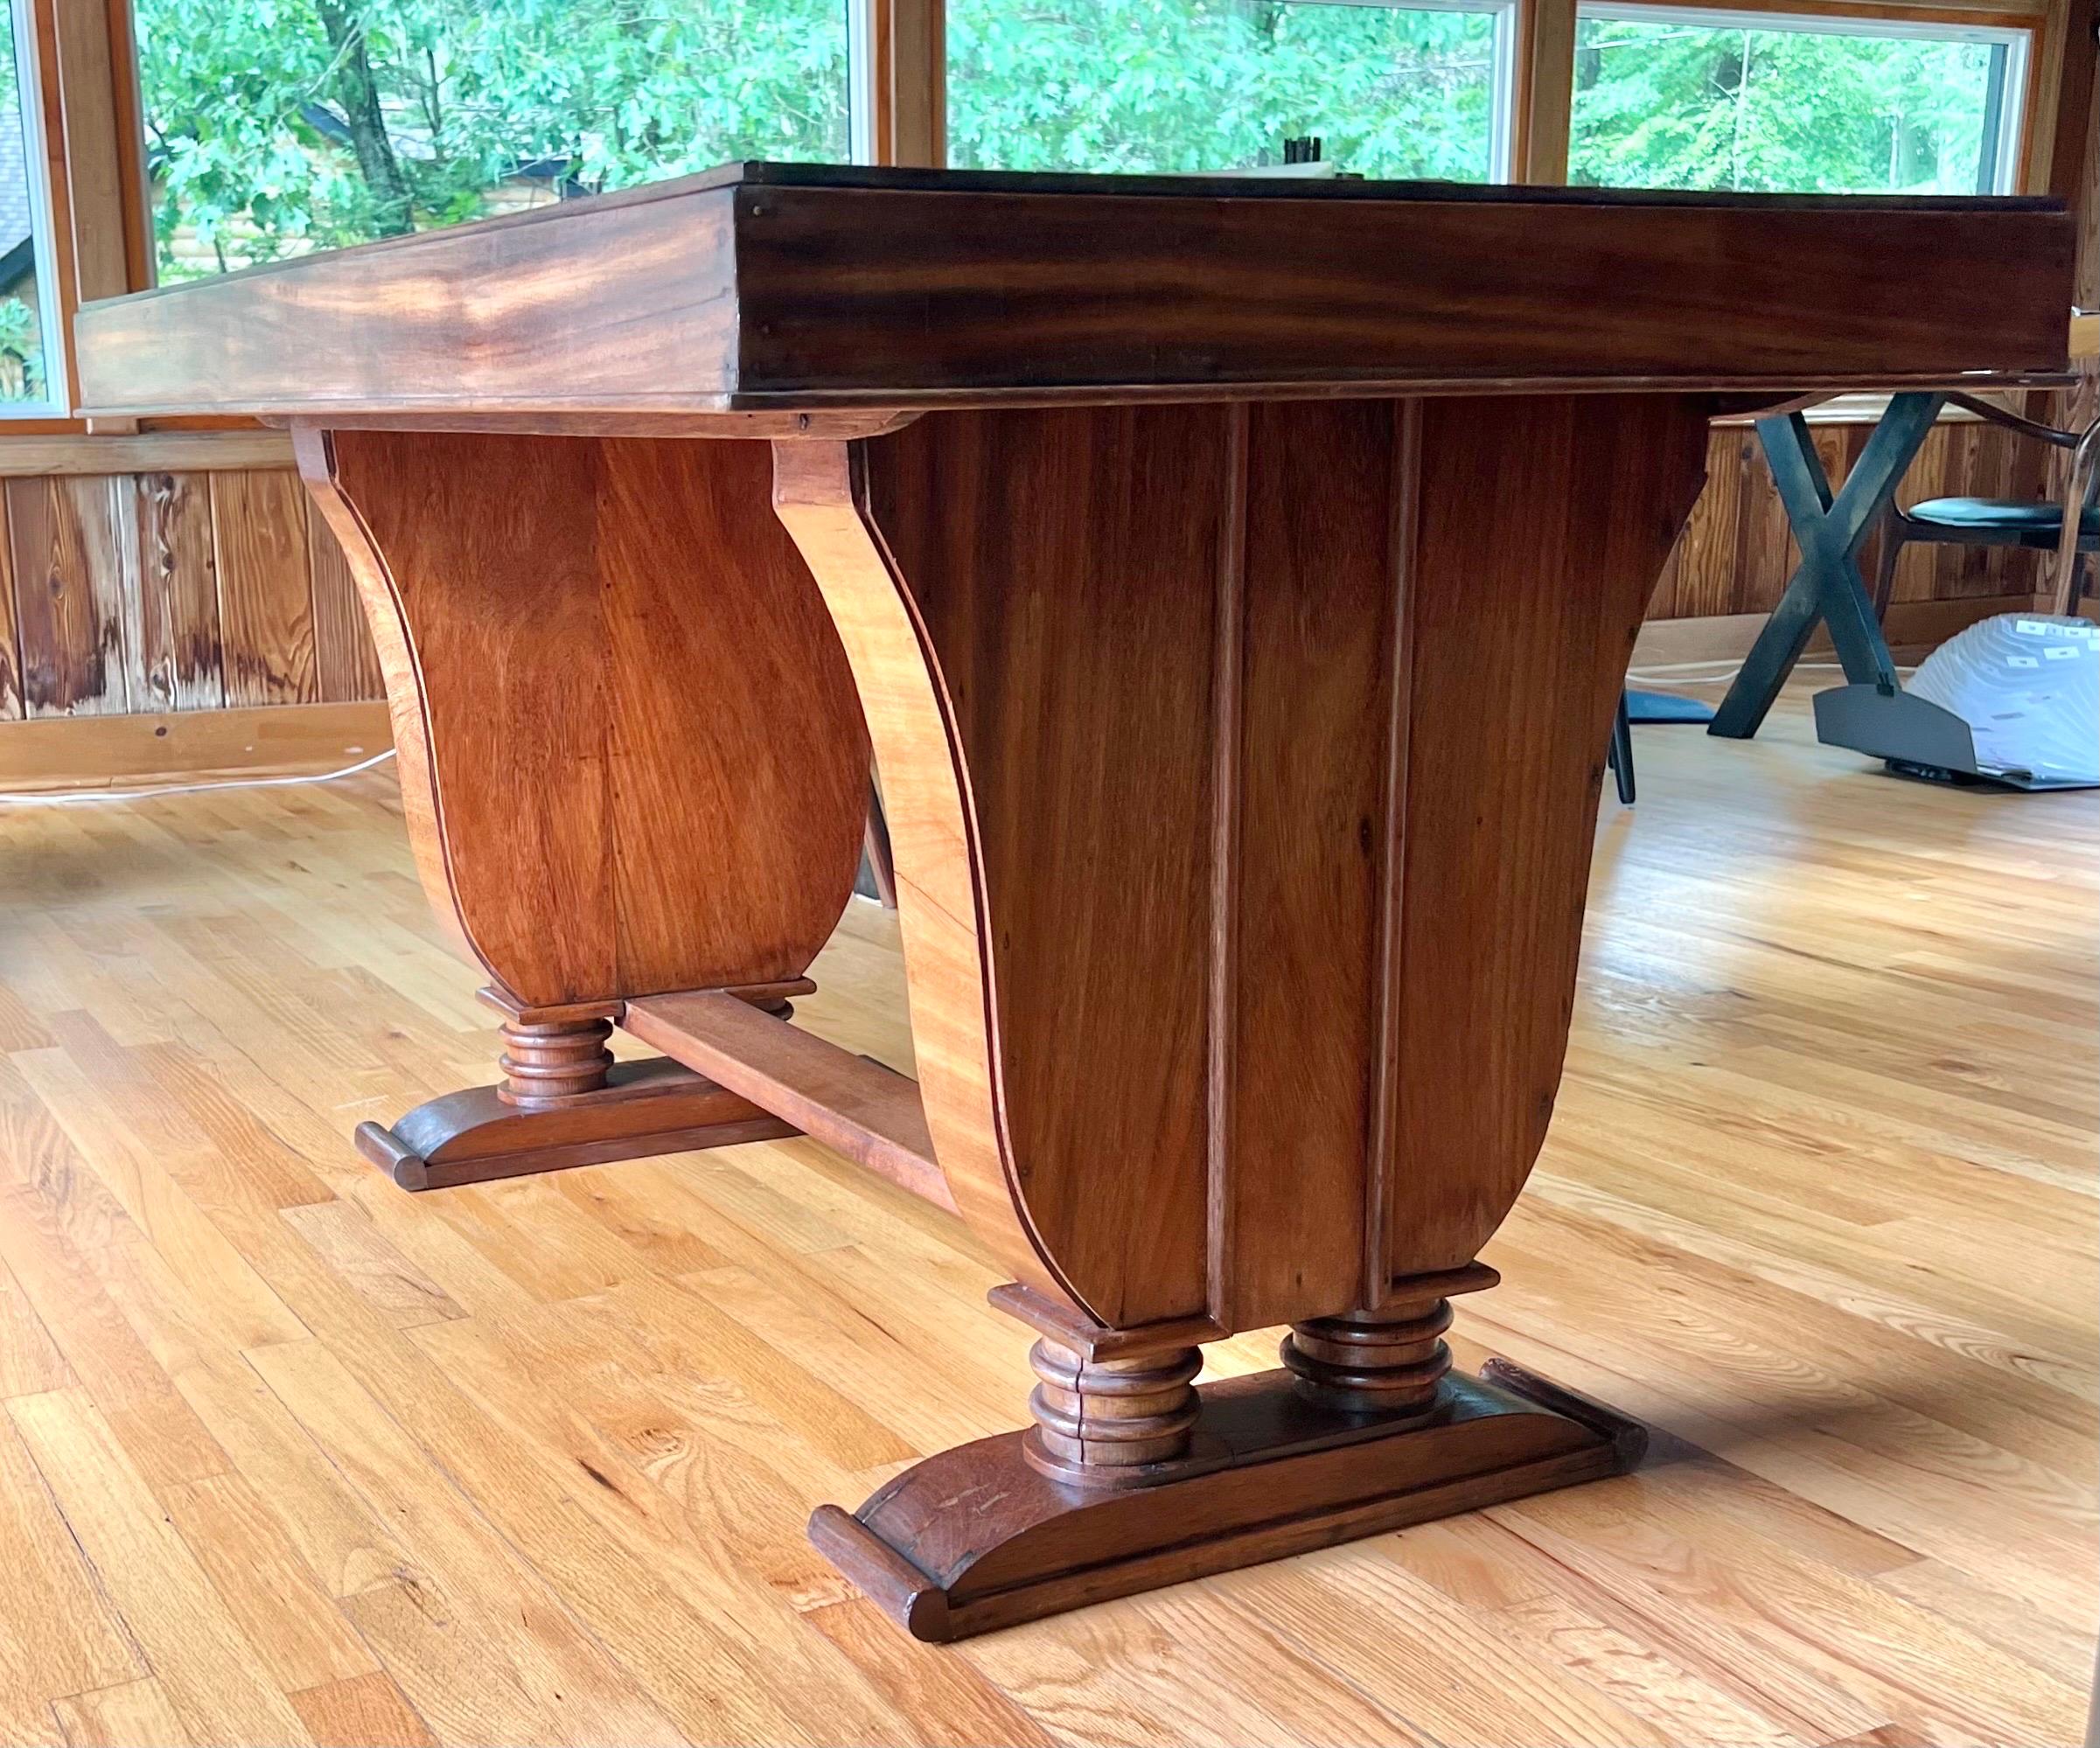 Hand-Crafted Rare French Art Deco Writing Table / Desk in Teak c. 1925, style of Andre Groult For Sale